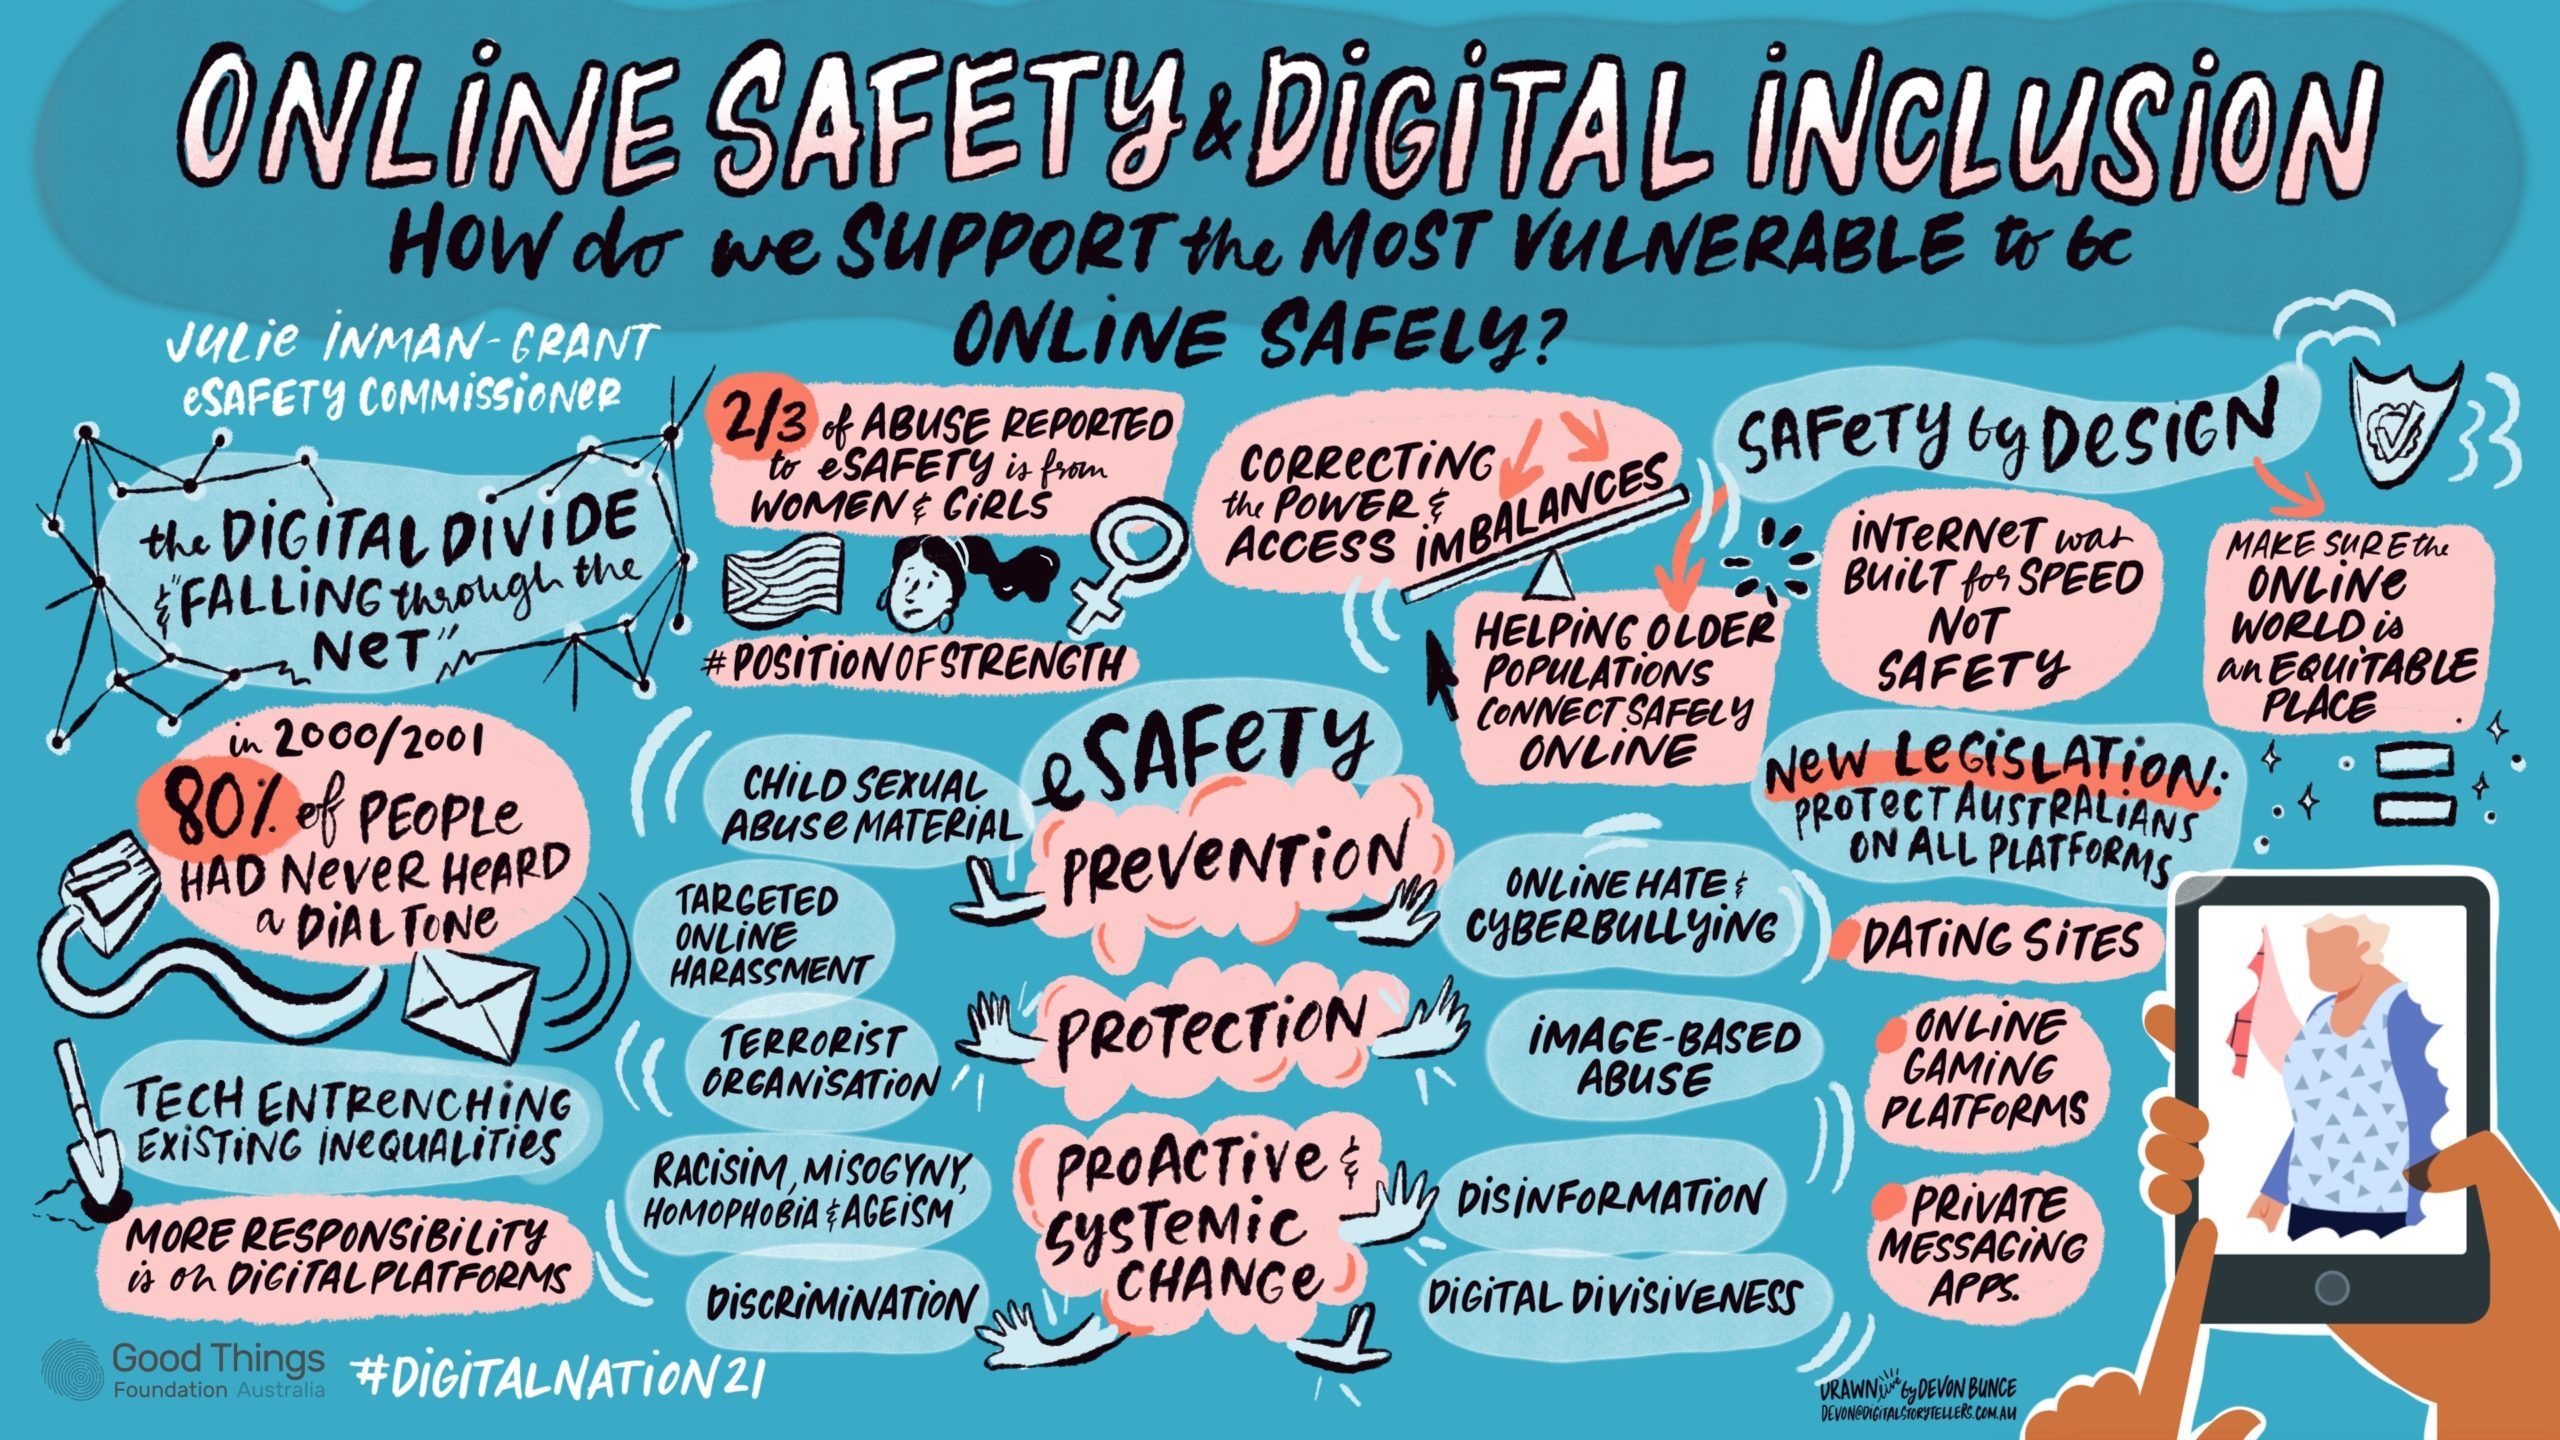 Infographic with the title 'Online safety & digital inclusion: How do we support the most vulnerable to be online safely?'. Underneath the heading is name of presenter Julie Inman-Grant, eSafety Commissioner. On the left hand side is the heading 'The digital divide & falling through the net' with the following connected text bubbles: 'In 2000/2001, 80% of people had never heard a dial tone', 'two-thirds of abuse reported to eSafety is from women and girls #positionofstrength', 'tech entrenching existing inequalities: more responsibility is on digital platforms'. In the centre is a column titled 'eSafety' with three headings reading 'prevention', 'protection' and 'proactive & systematic change'. From these headings are drawings of hands in a stop gesture with the connected text bubbles reading: 'child sexual abuse material', 'targeted online harassment', 'terrorist organisation', 'racism, misogyny, homophobia & ageism', discrimination', 'online hate & cyberbullying', 'image-based abuse', 'disinformation' and 'digital divisiveness'. On the right side is the heading 'Safety by design' with the connected text bubbles reading: 'Helping older populations connect safely online', 'correcting the power & access imbalances', 'Internet was built for speed not safety', 'make sure the online world is an equitable place'. On the bottom right is a heading reading 'New legislation: Protect Australians on all platforms'. Connected text bubbles read: 'dating sites', 'online gaming platforms', 'private messaging apps'. Footer text reads '#DigitalNation21' with logo for Good Things Foundation Australia and logo reading 'Drawn by Devon Bunce devon@digitalstorytellers.com.au'